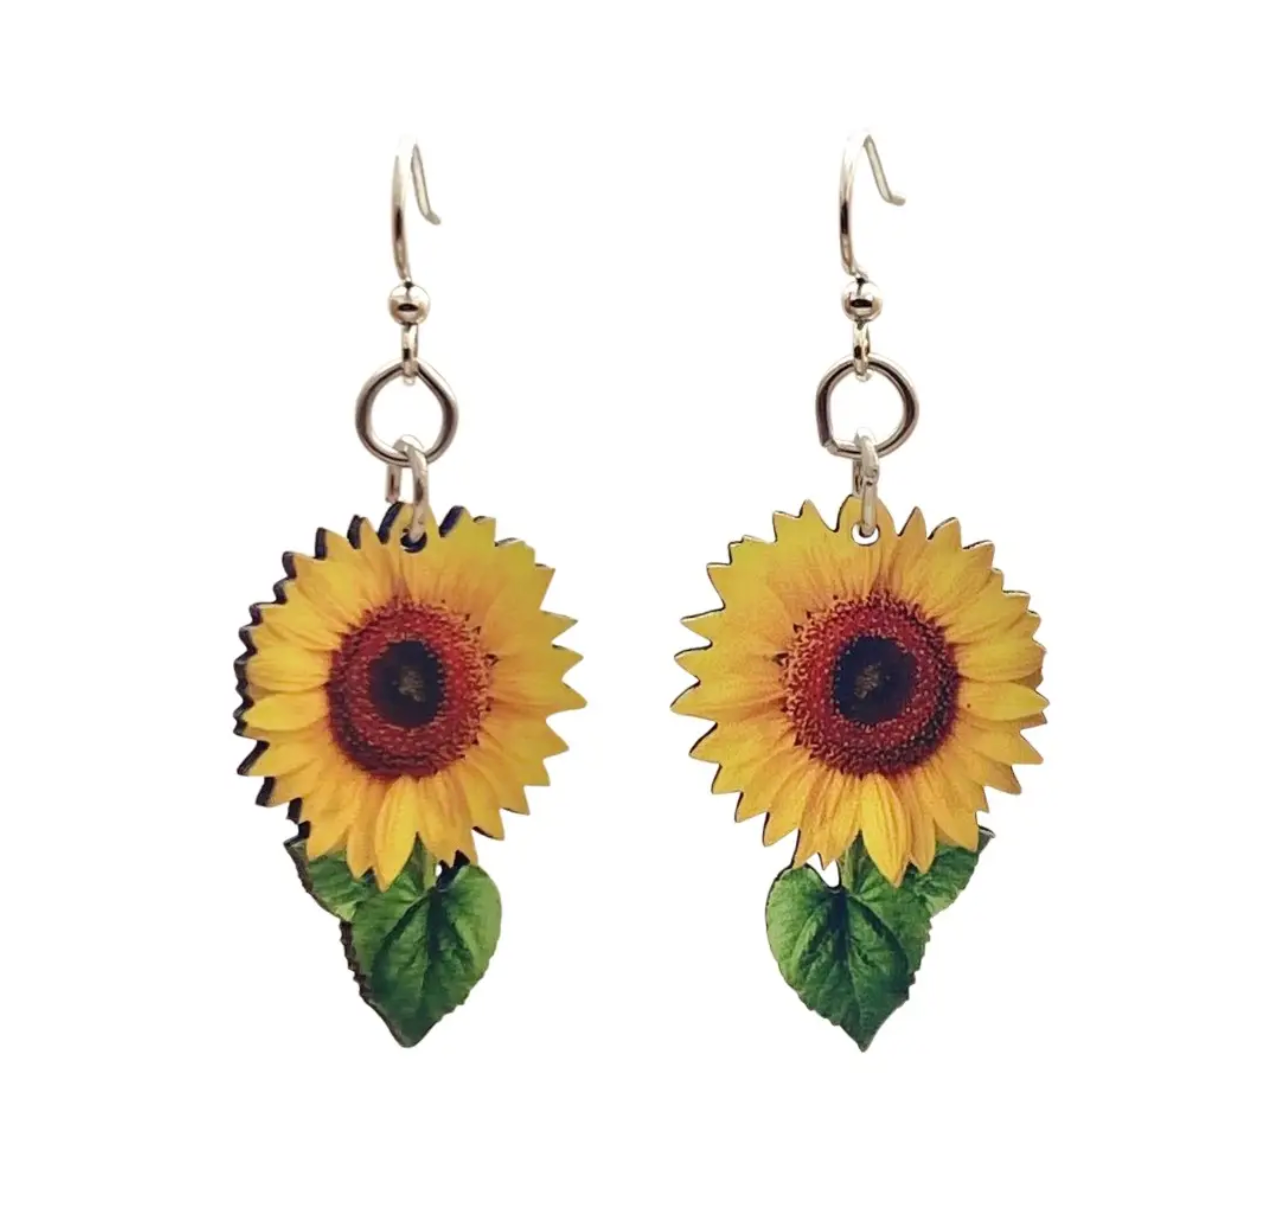 Sunflowers and Leaves Wooden Earrings